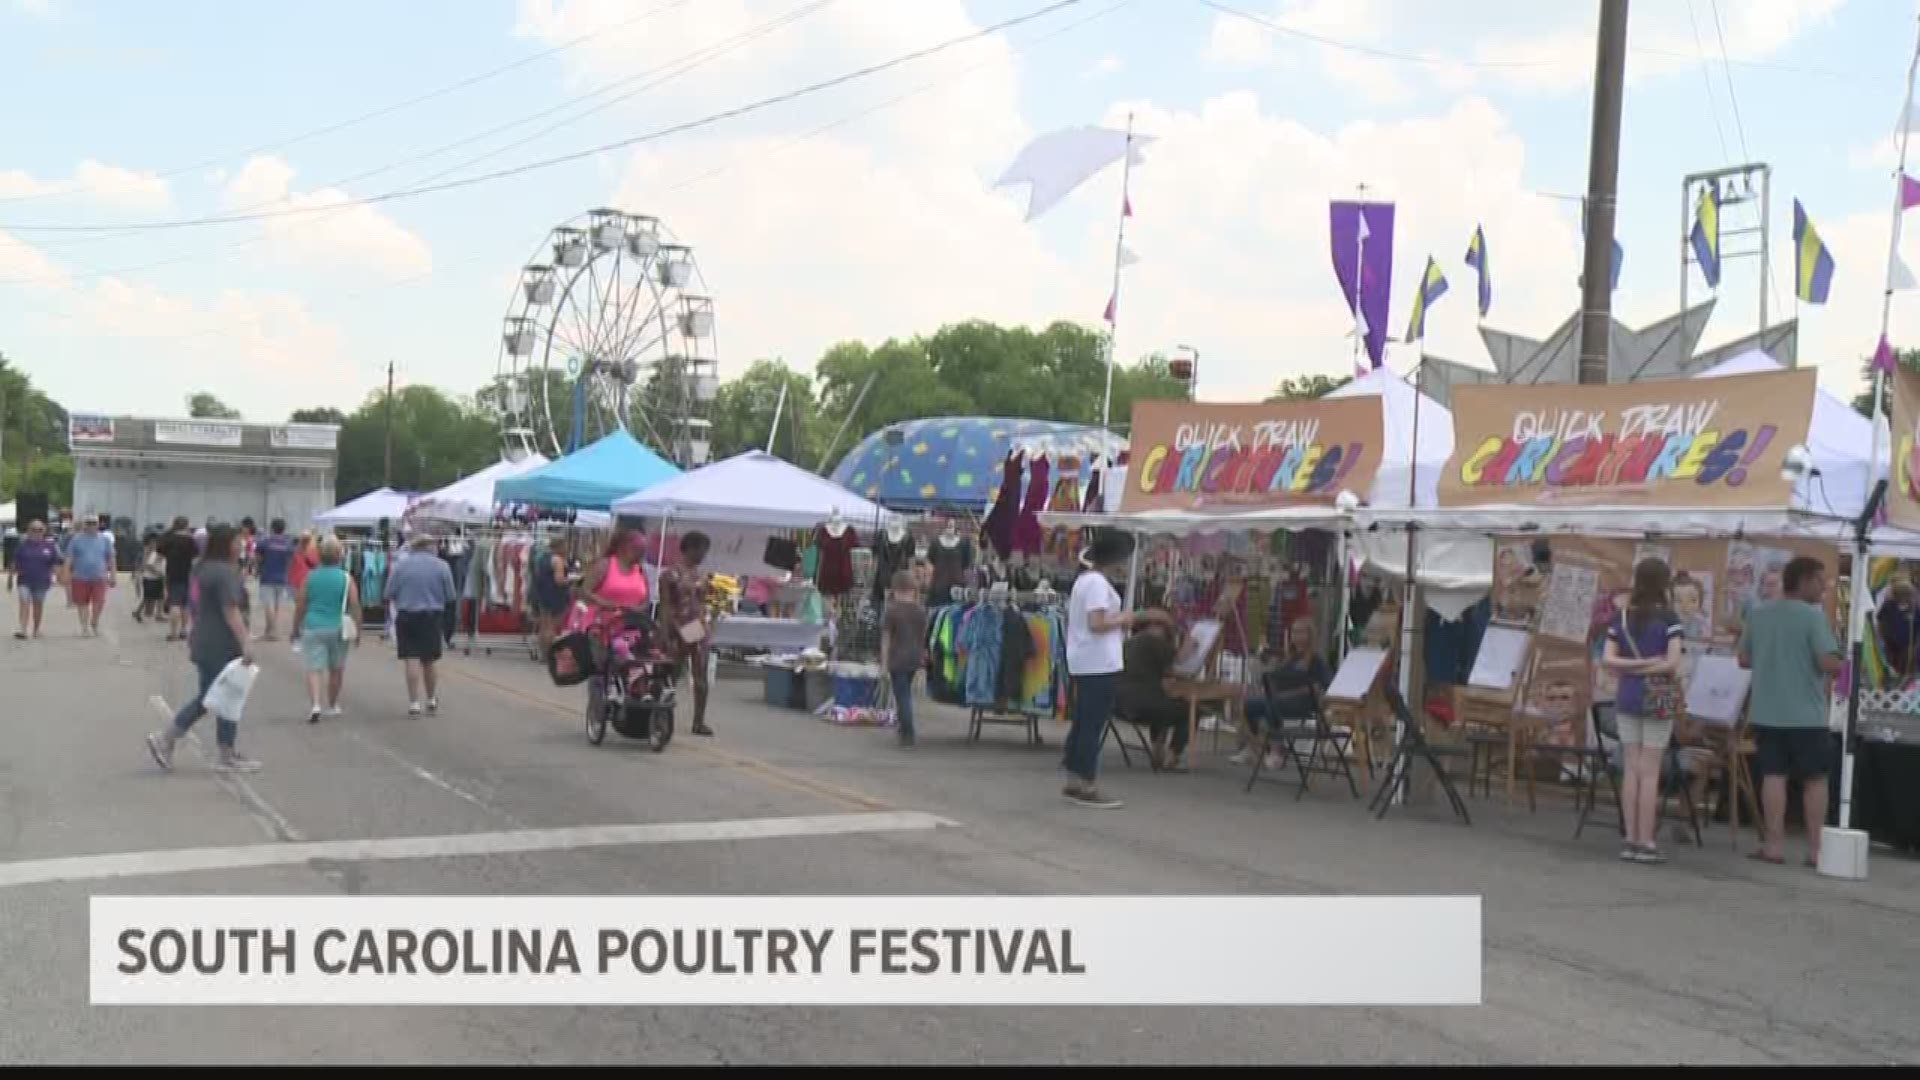 The South Carolina Poultry Festival was held in Batesburg-Leesville on Saturday.